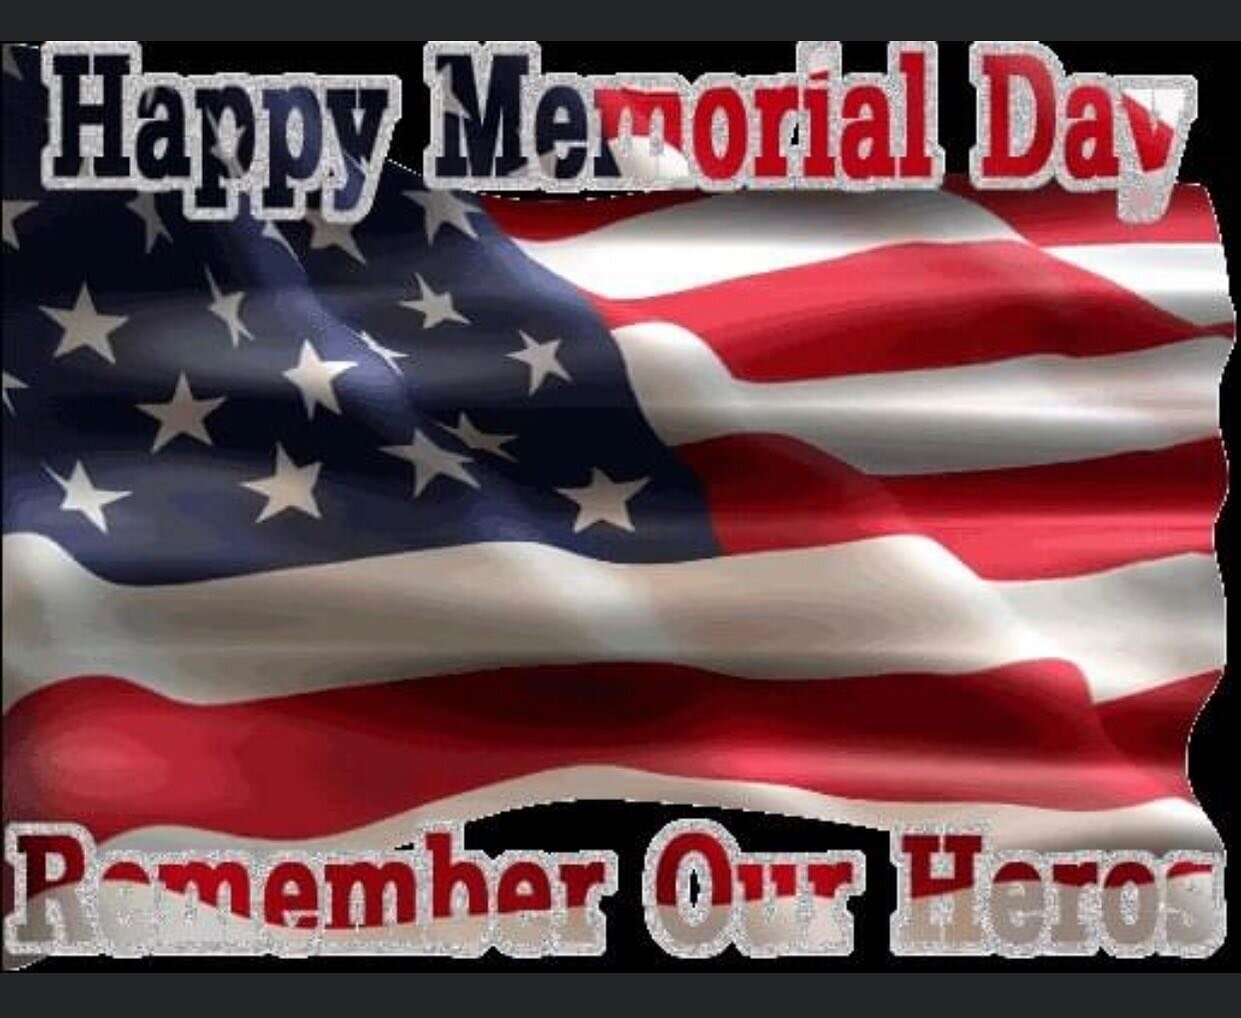 Happy Memorial Day!  The studio will be closed today to honor our fallen hero&rsquo;s.